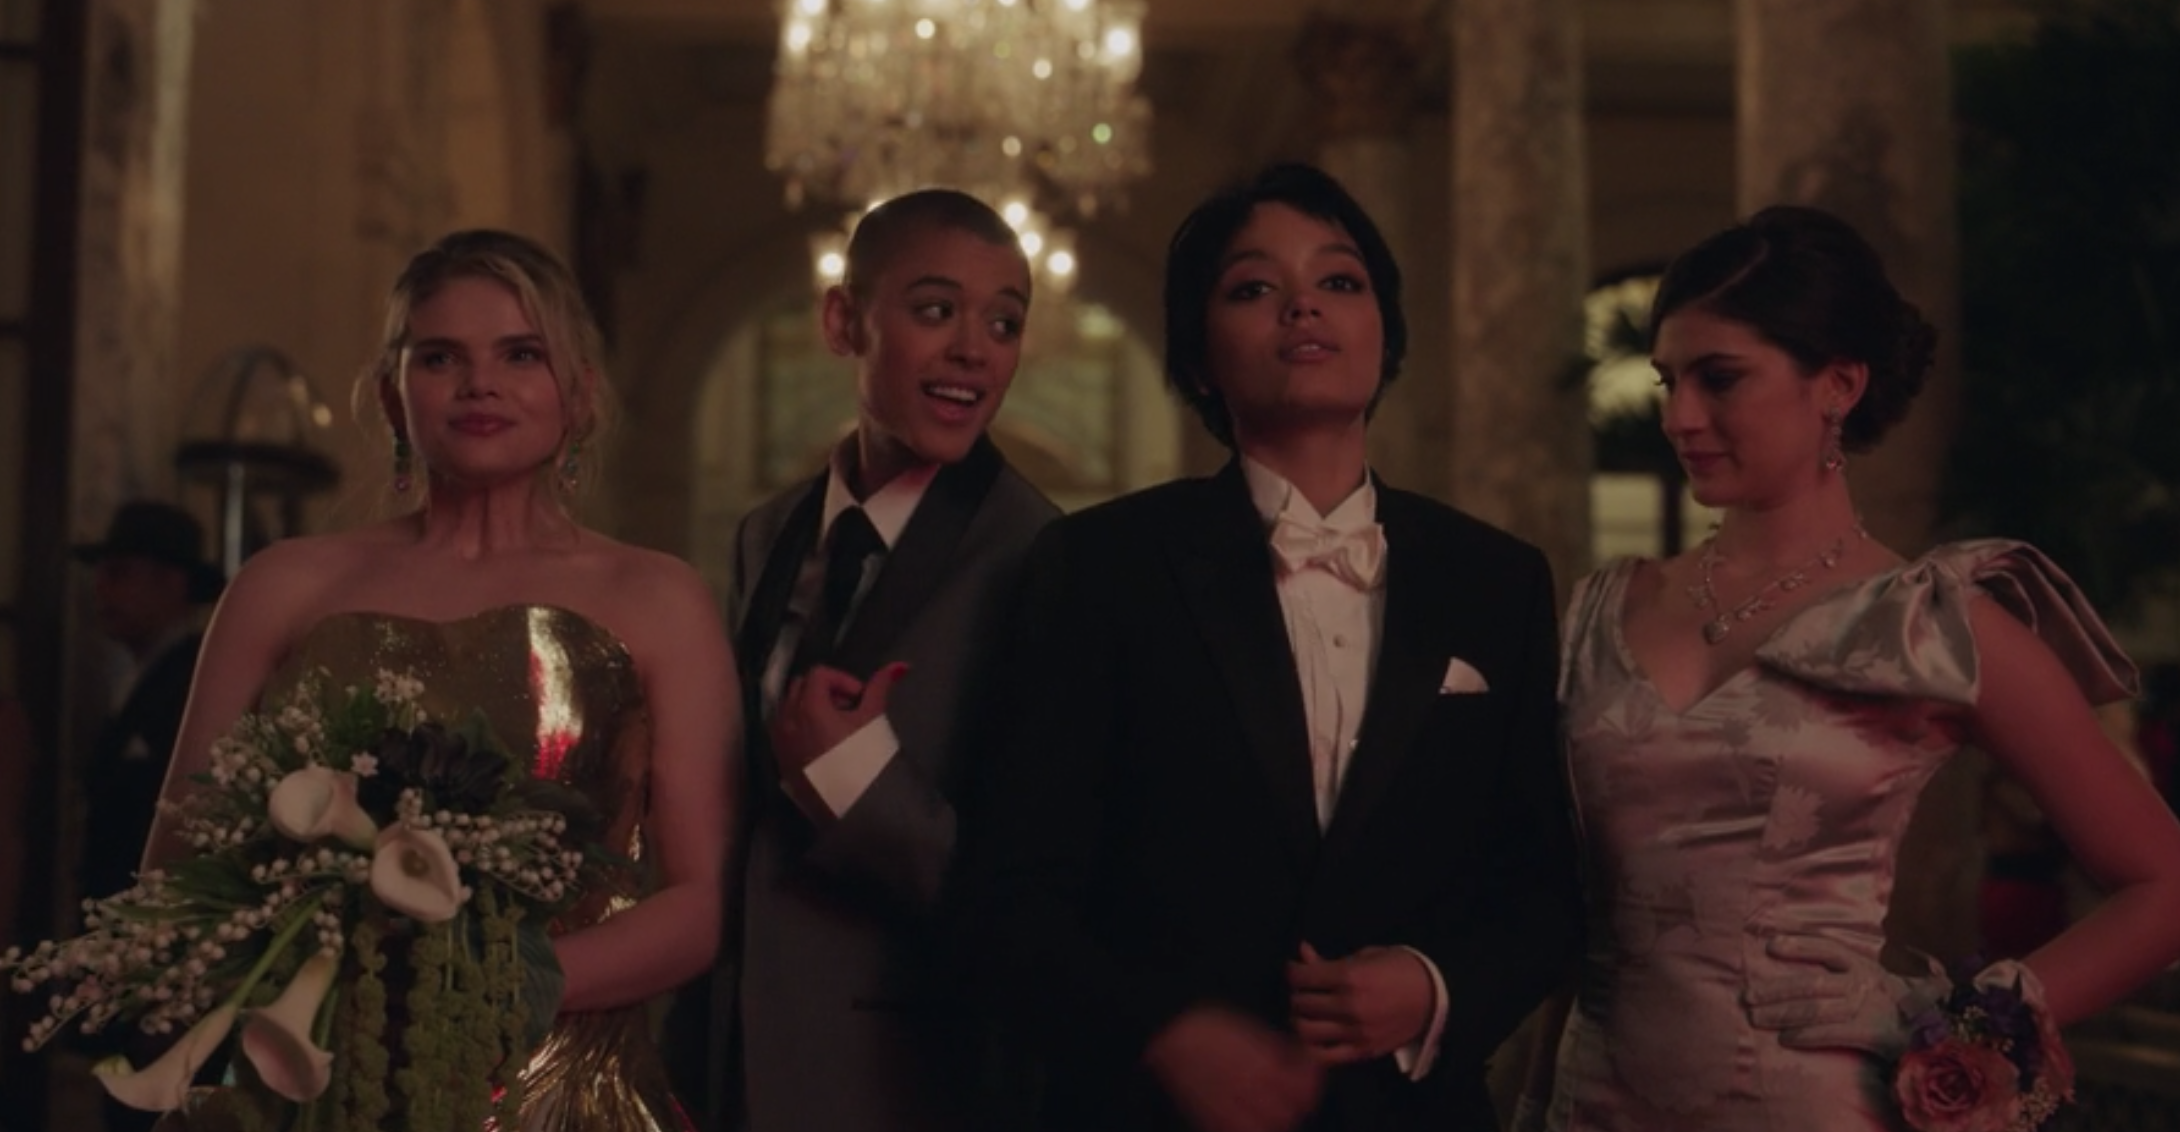 Pippa wears a strapless gown, Julien wears a light colored suit, Zoya wears a dark colored suit, and Bianca wears a tank top gown with a giant bow on the shoulder